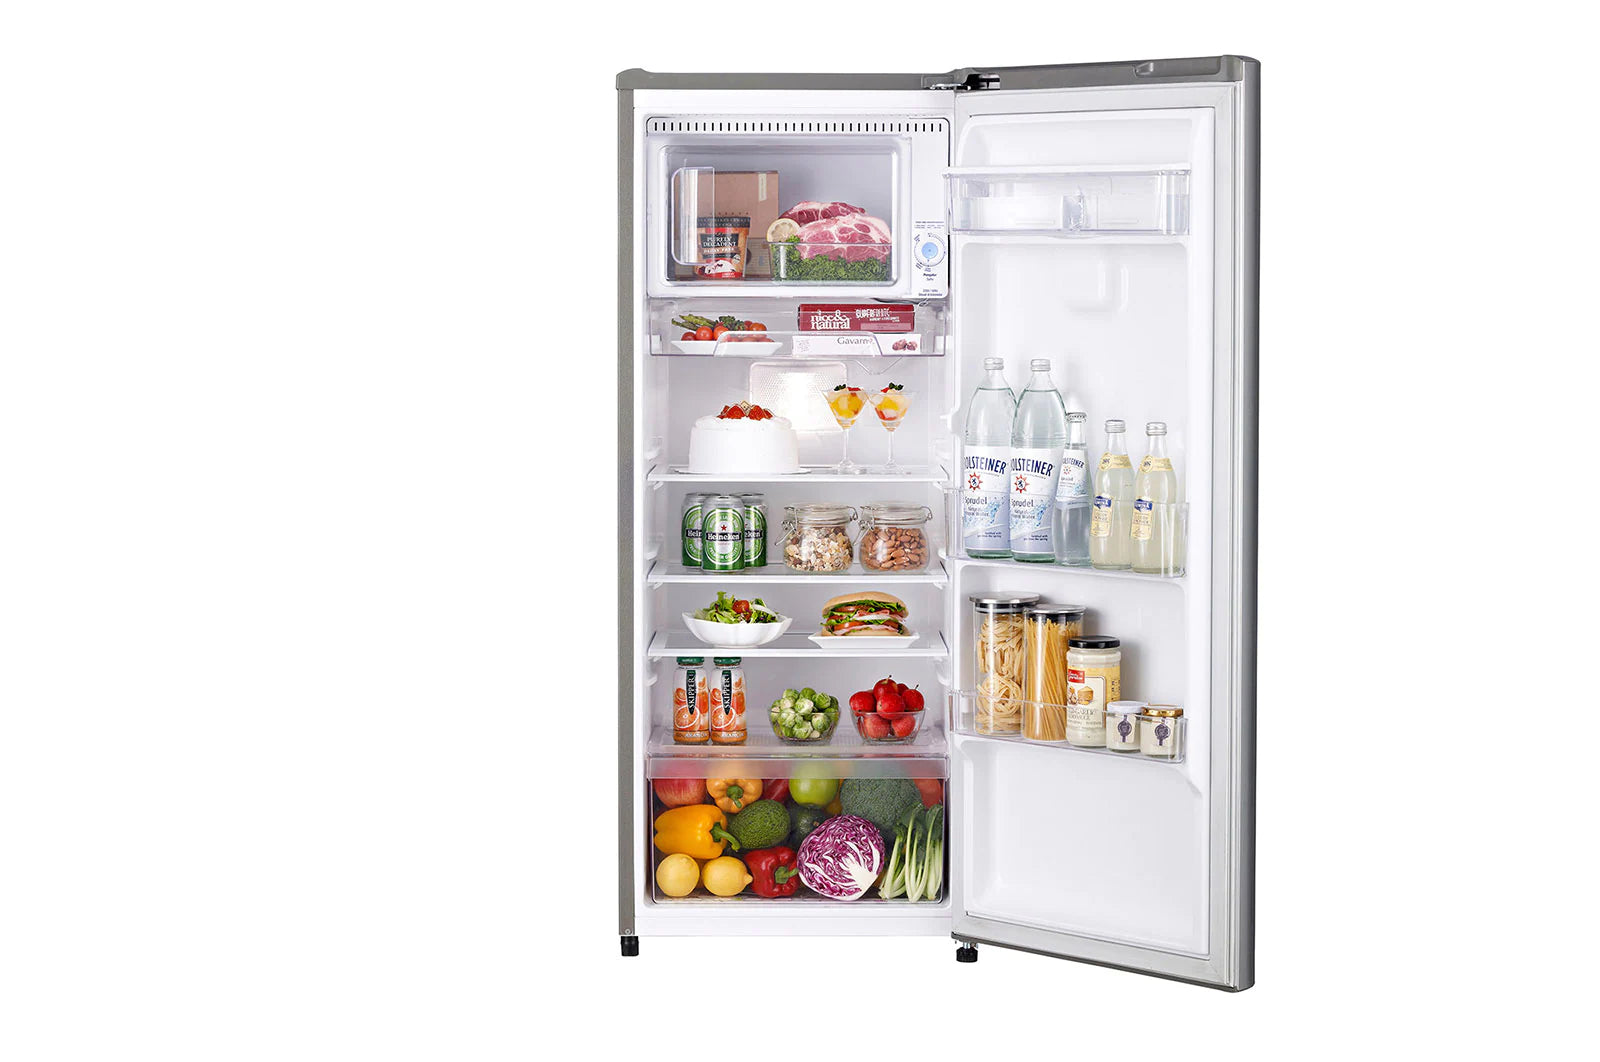 LG Refrigerator 7 Cu. ft. with Water Dispenser